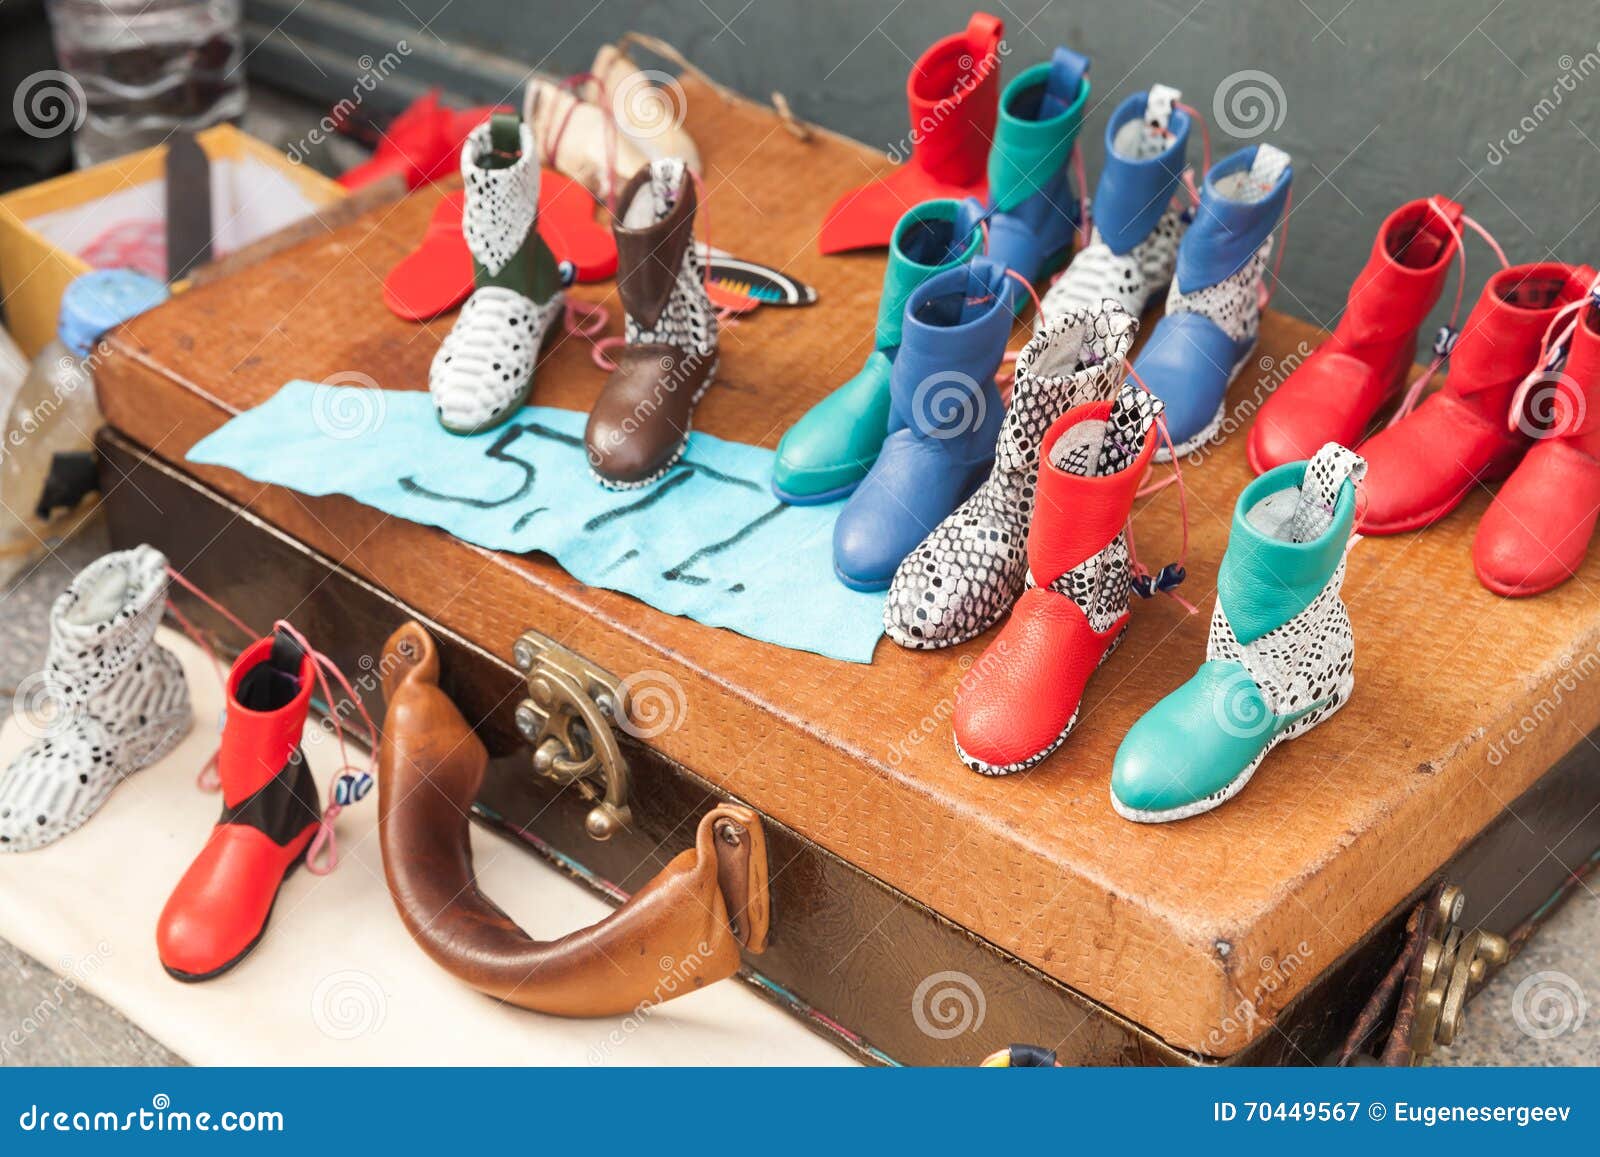 Turkish Handmade Souvenirs, Colorful Boots Editorial Photography ...